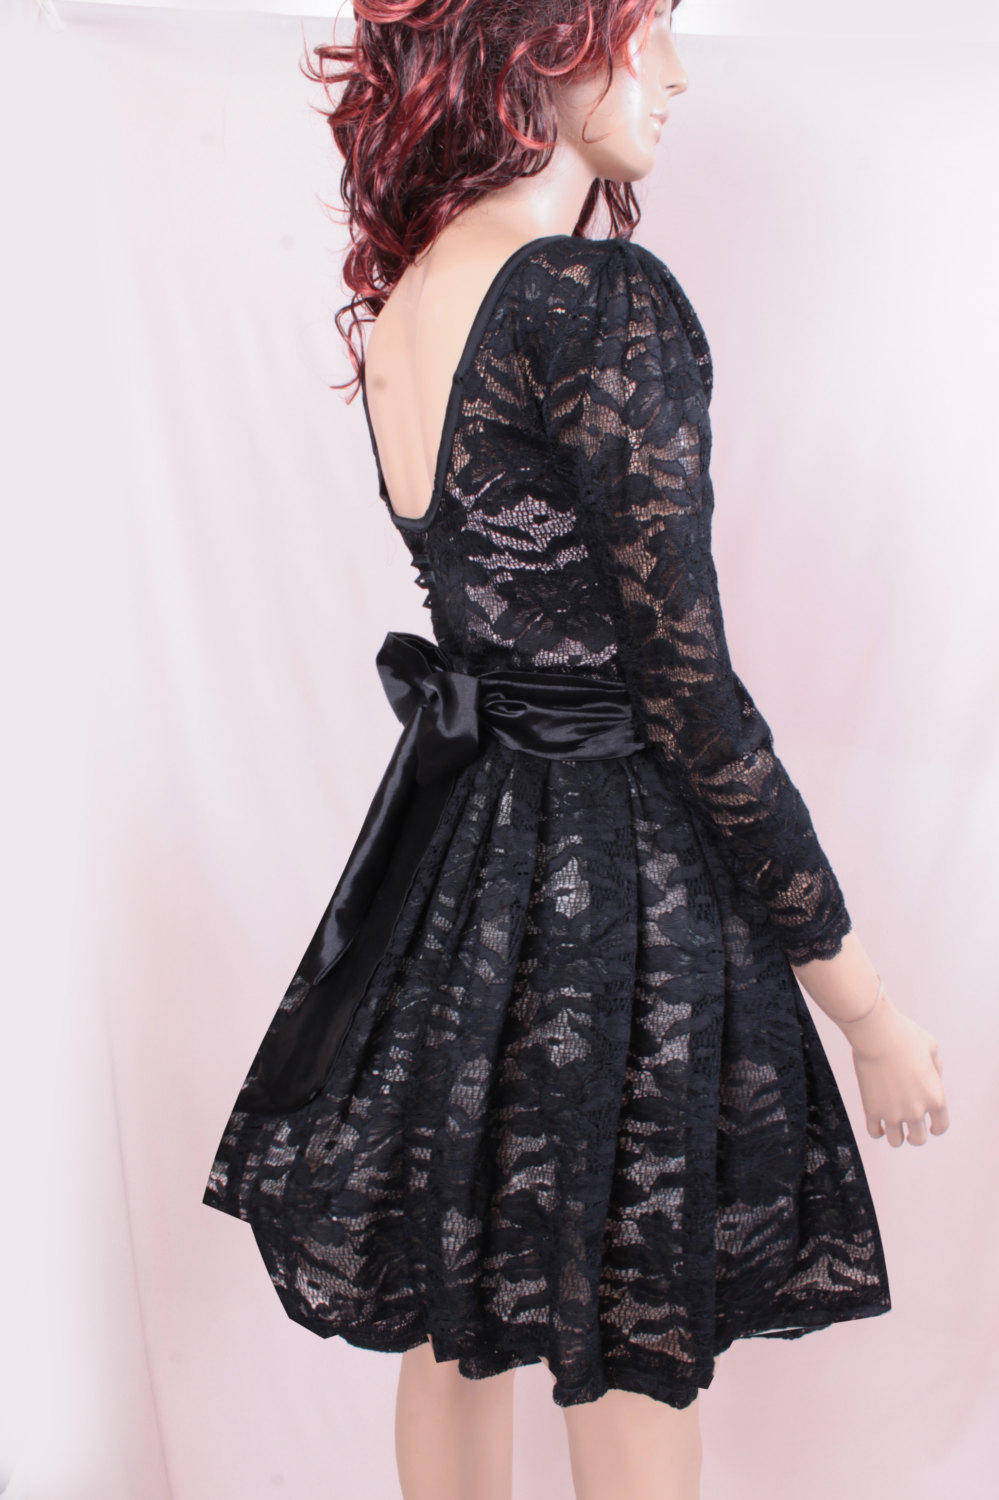 Little Black lace / wedding party /cocktail / mini / bridesmaid/ 3/4 sleeves / dress